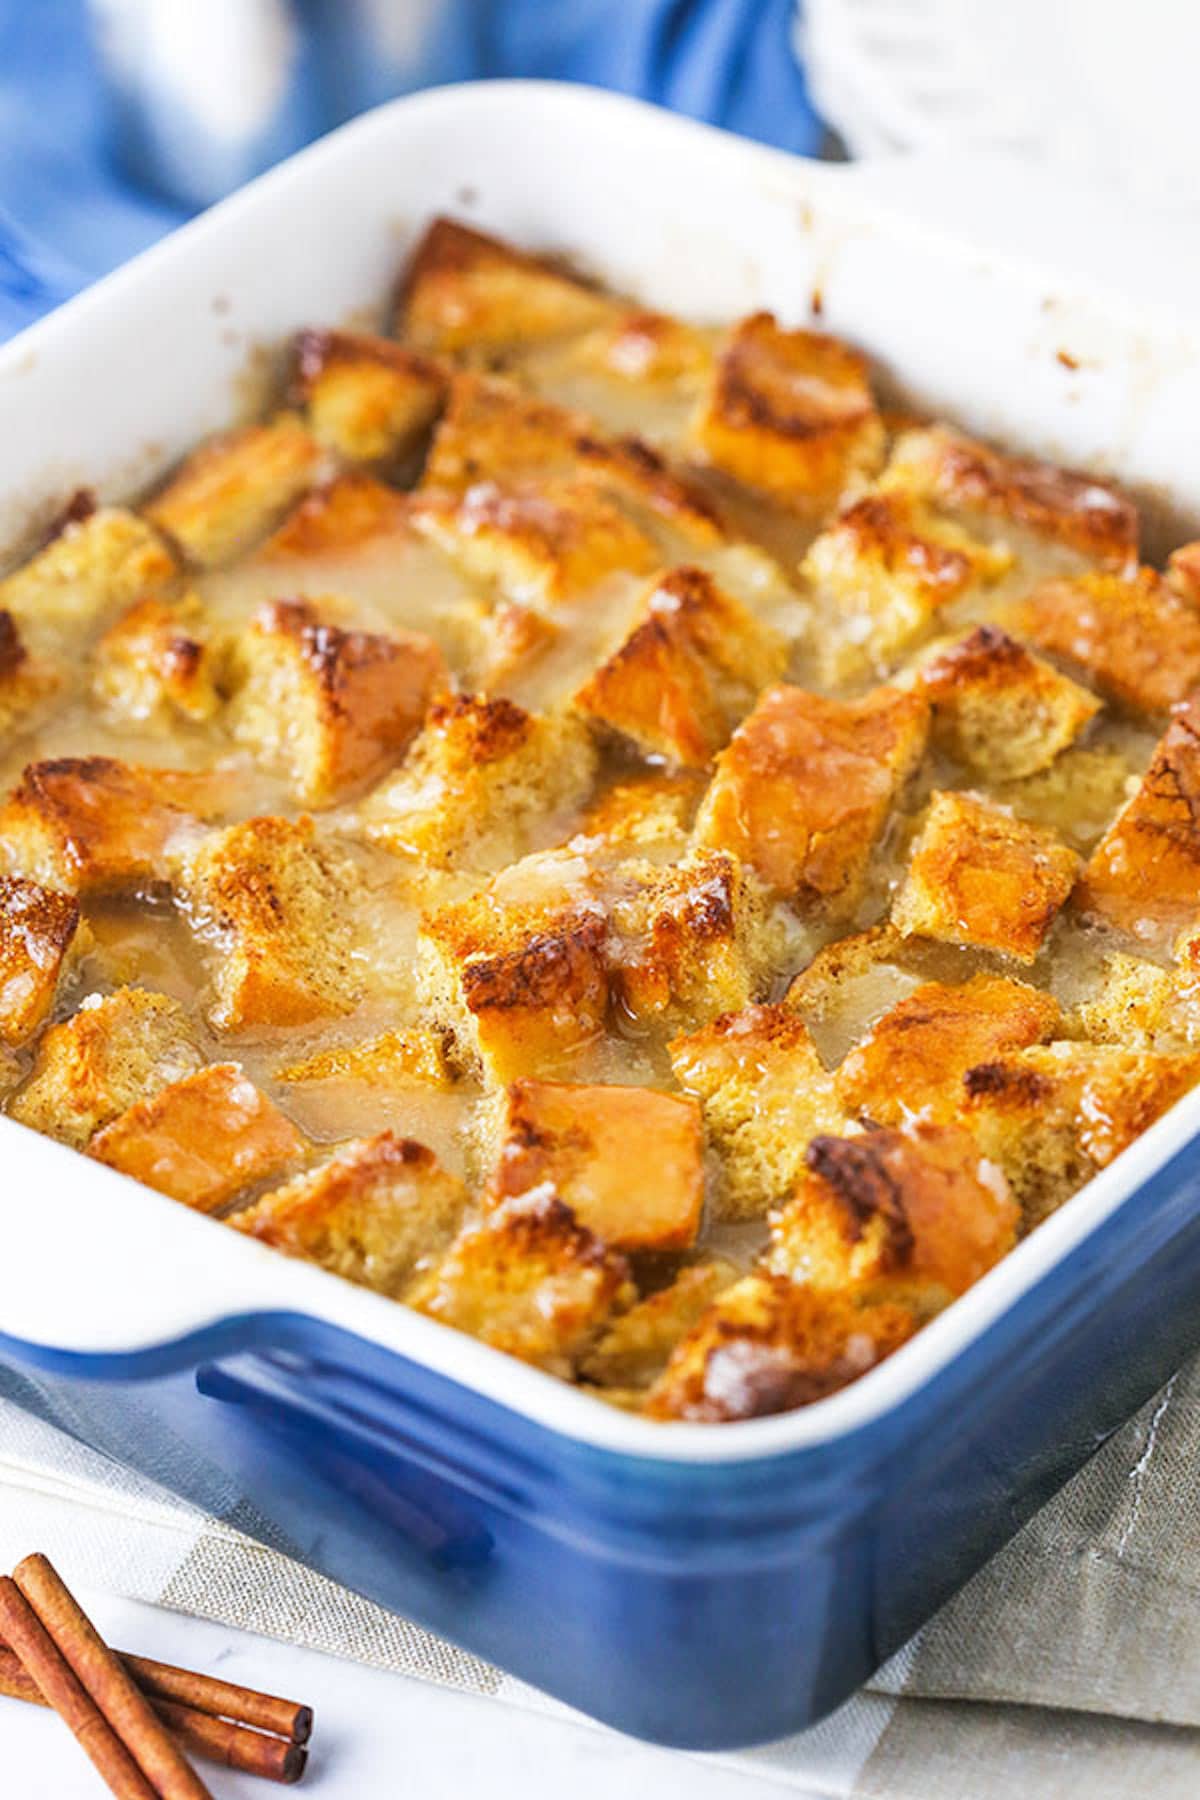 What is bread pudding made from?